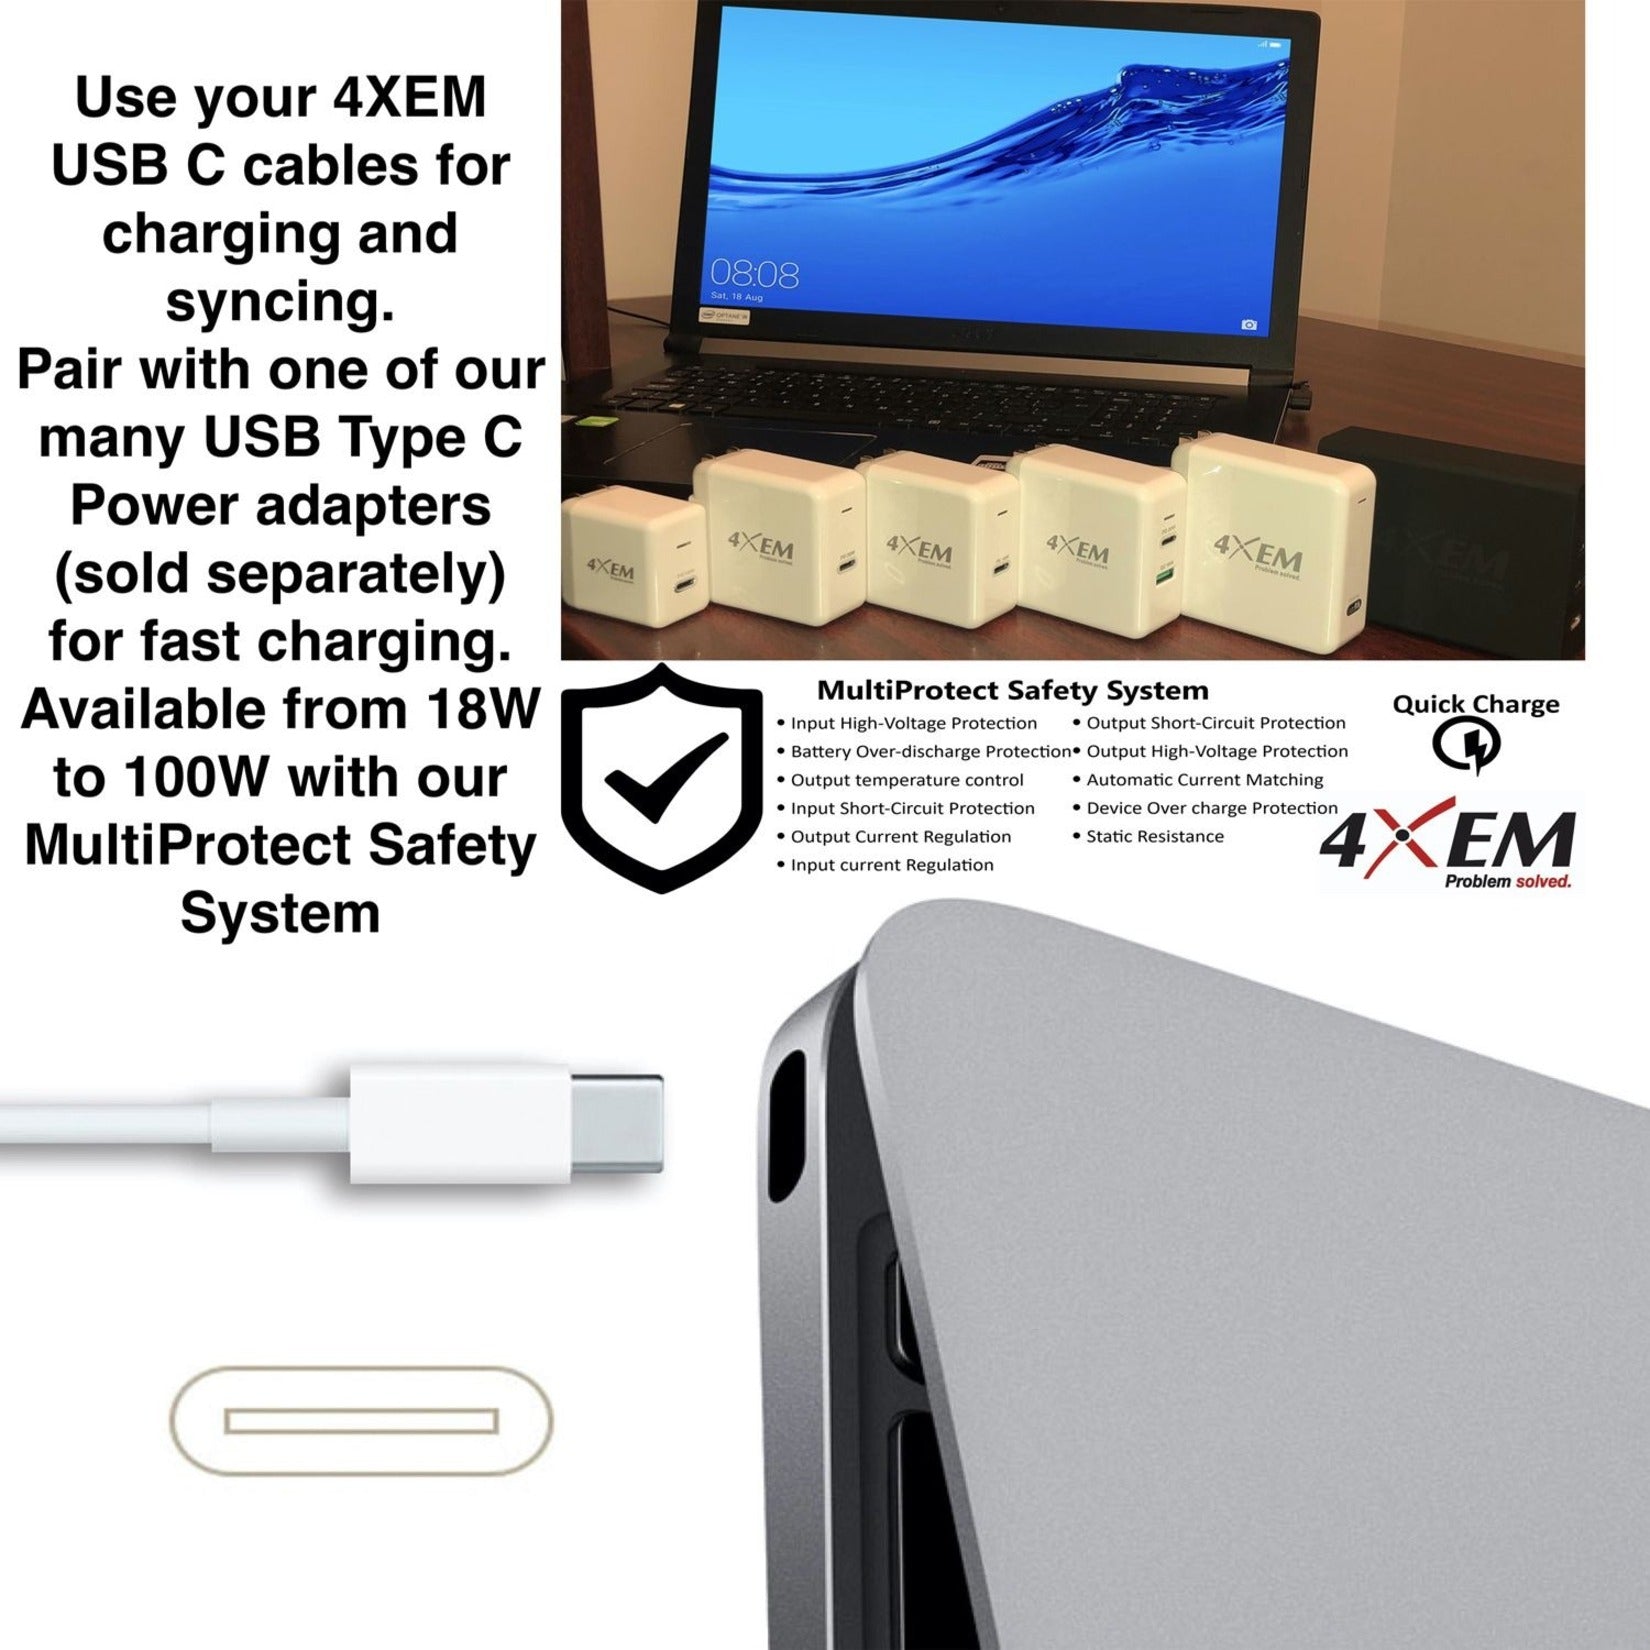 4XEM 4X30WMACKIT3 4XEM USB-C 30W Wall Charger/3ft UCB-C Cable Combo Kit, 2 Year Warranty, Apple MacBook Compatibility